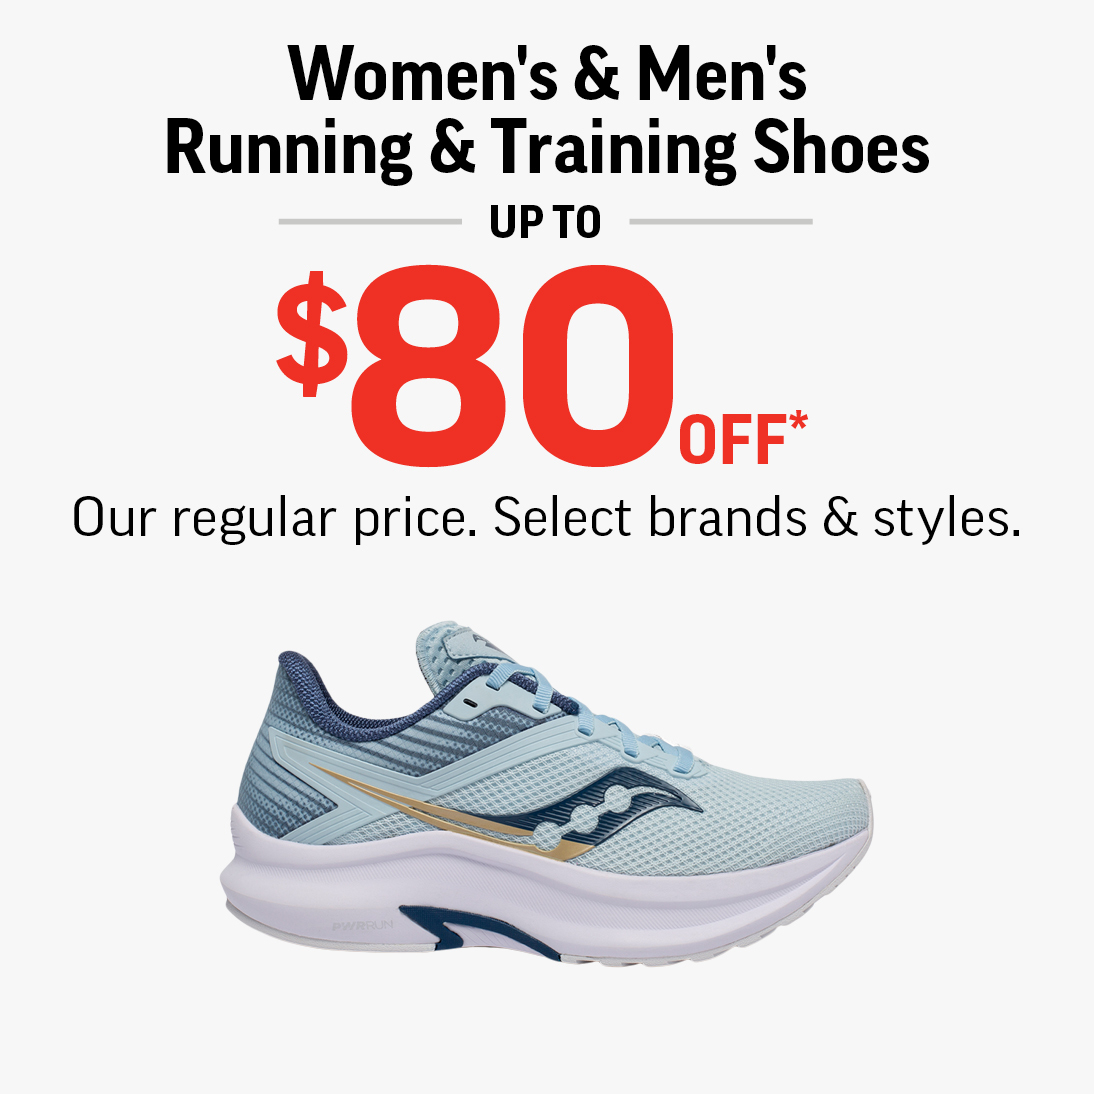 Offer title Women’s & Men’s Running & Training Shoes Up To $80 Off!